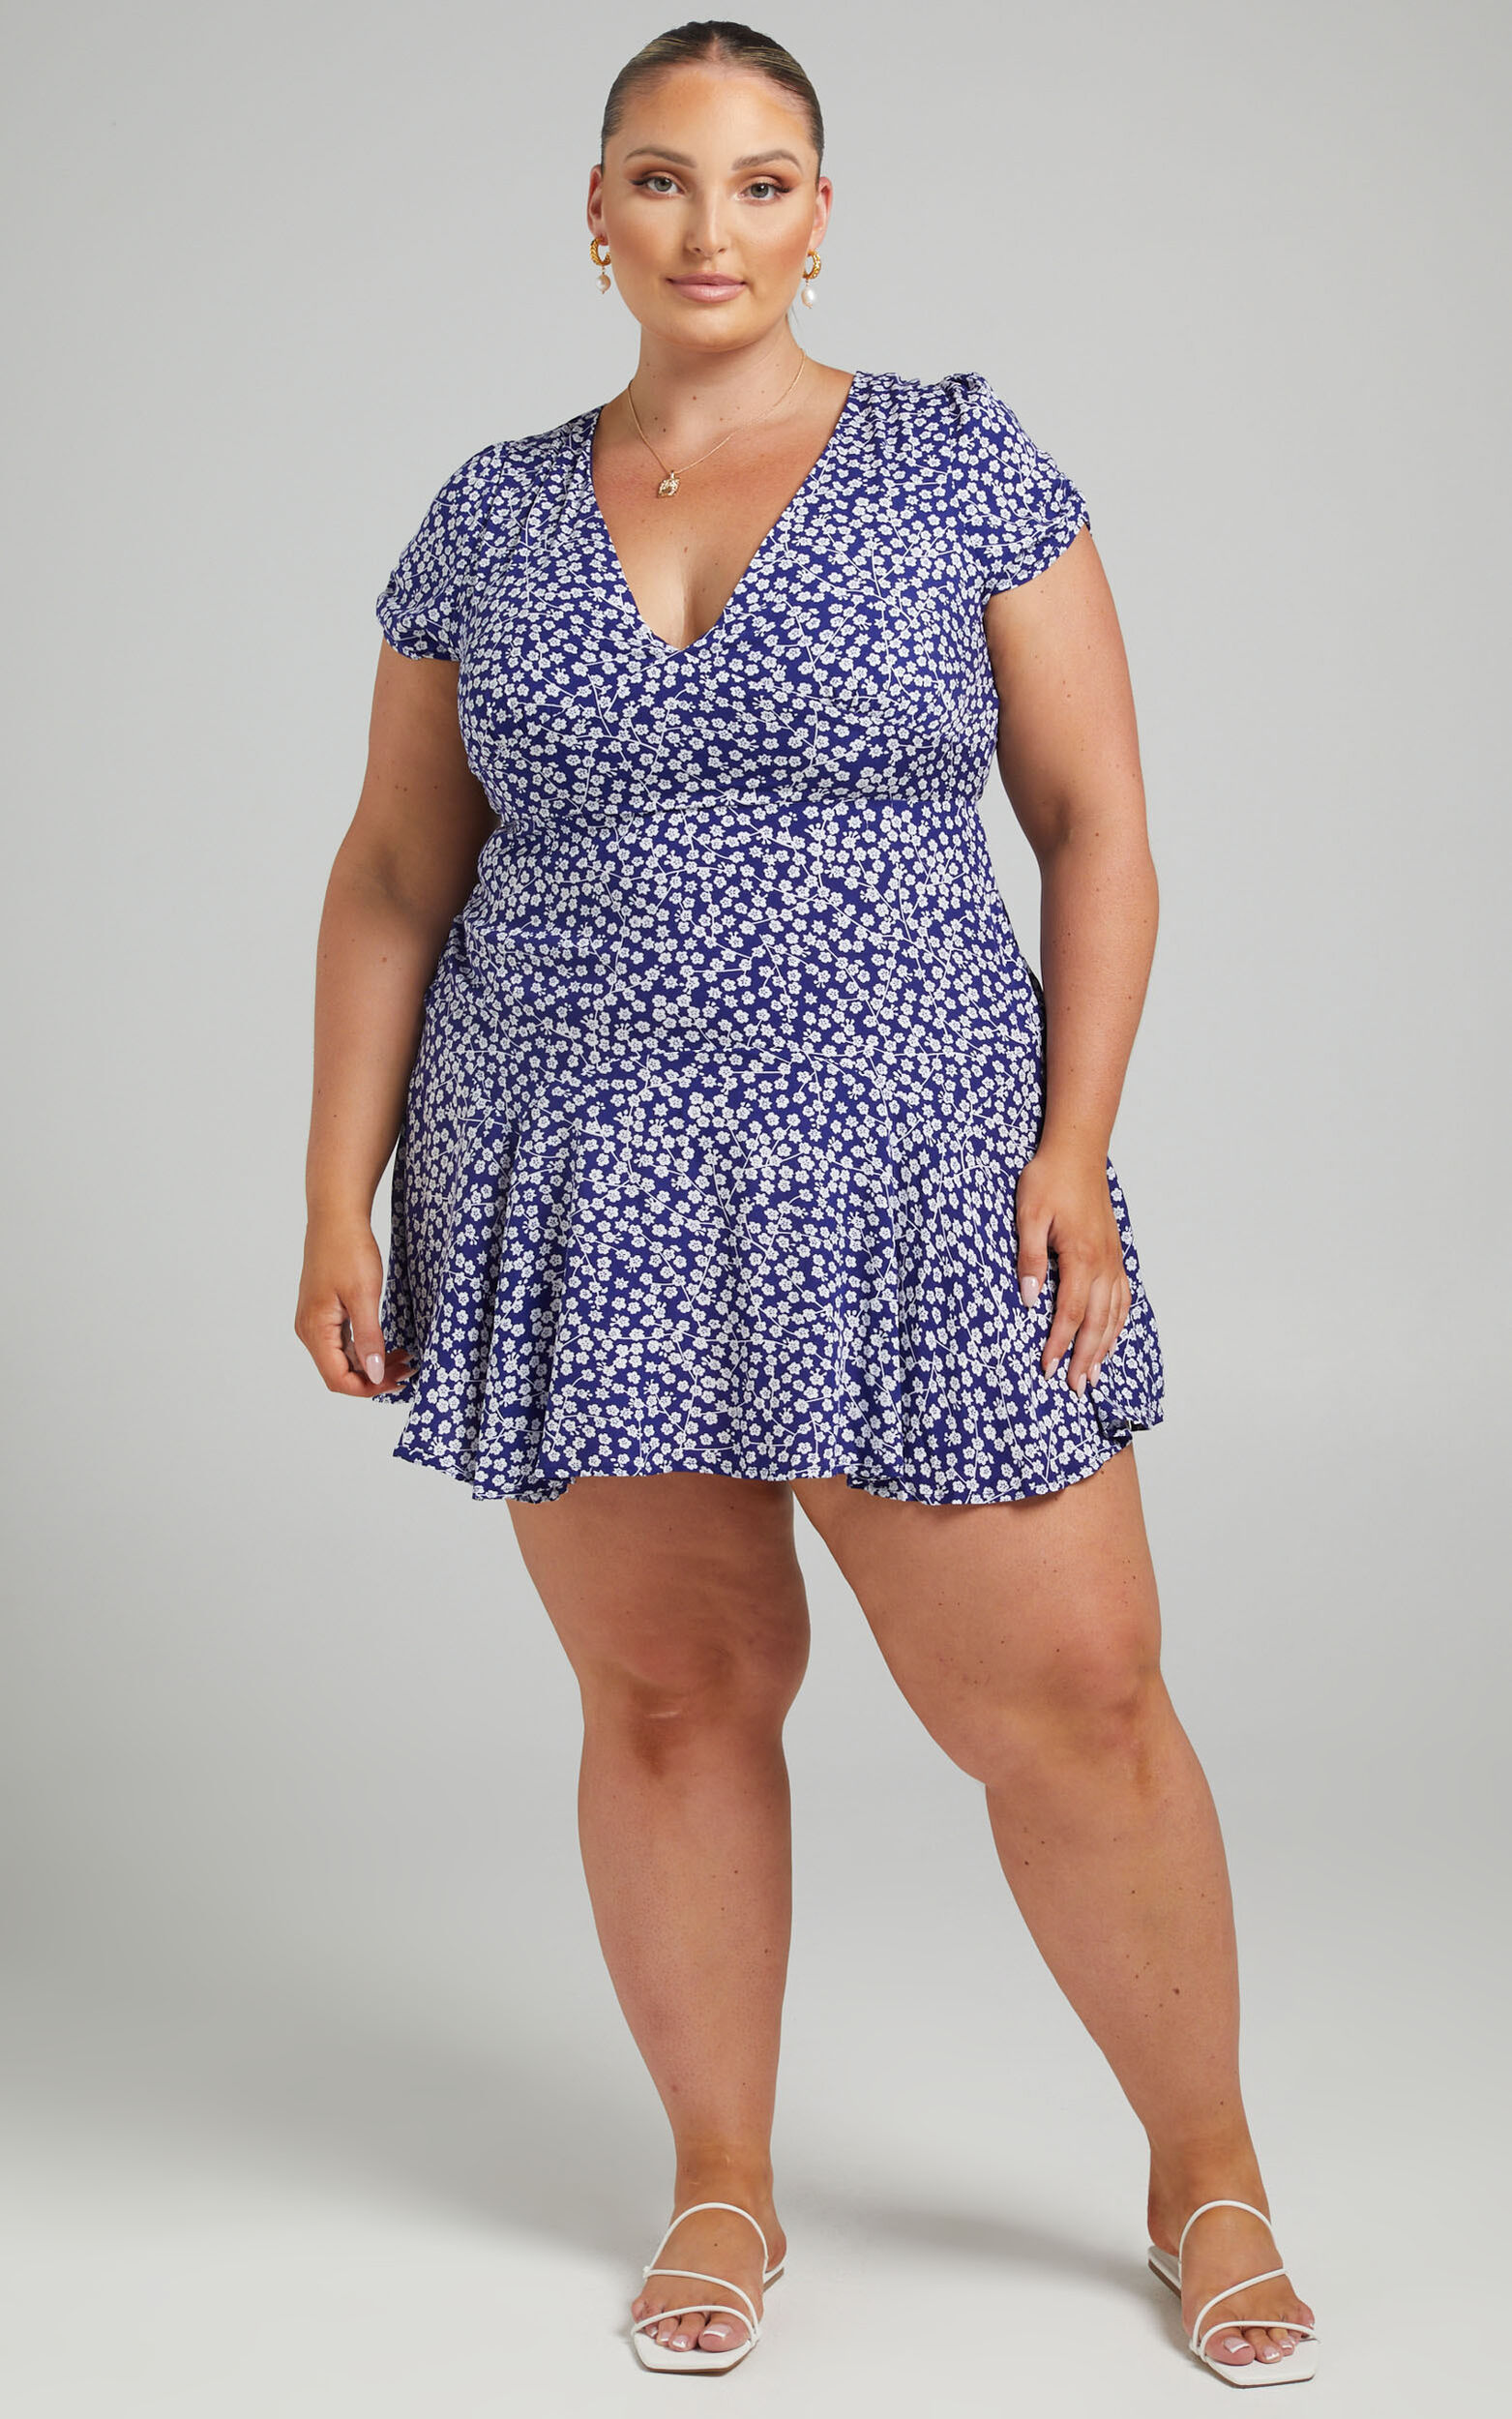 Bettina Short Sleeve Mini Dress in Navy - 06, NVY1, super-hi-res image number null